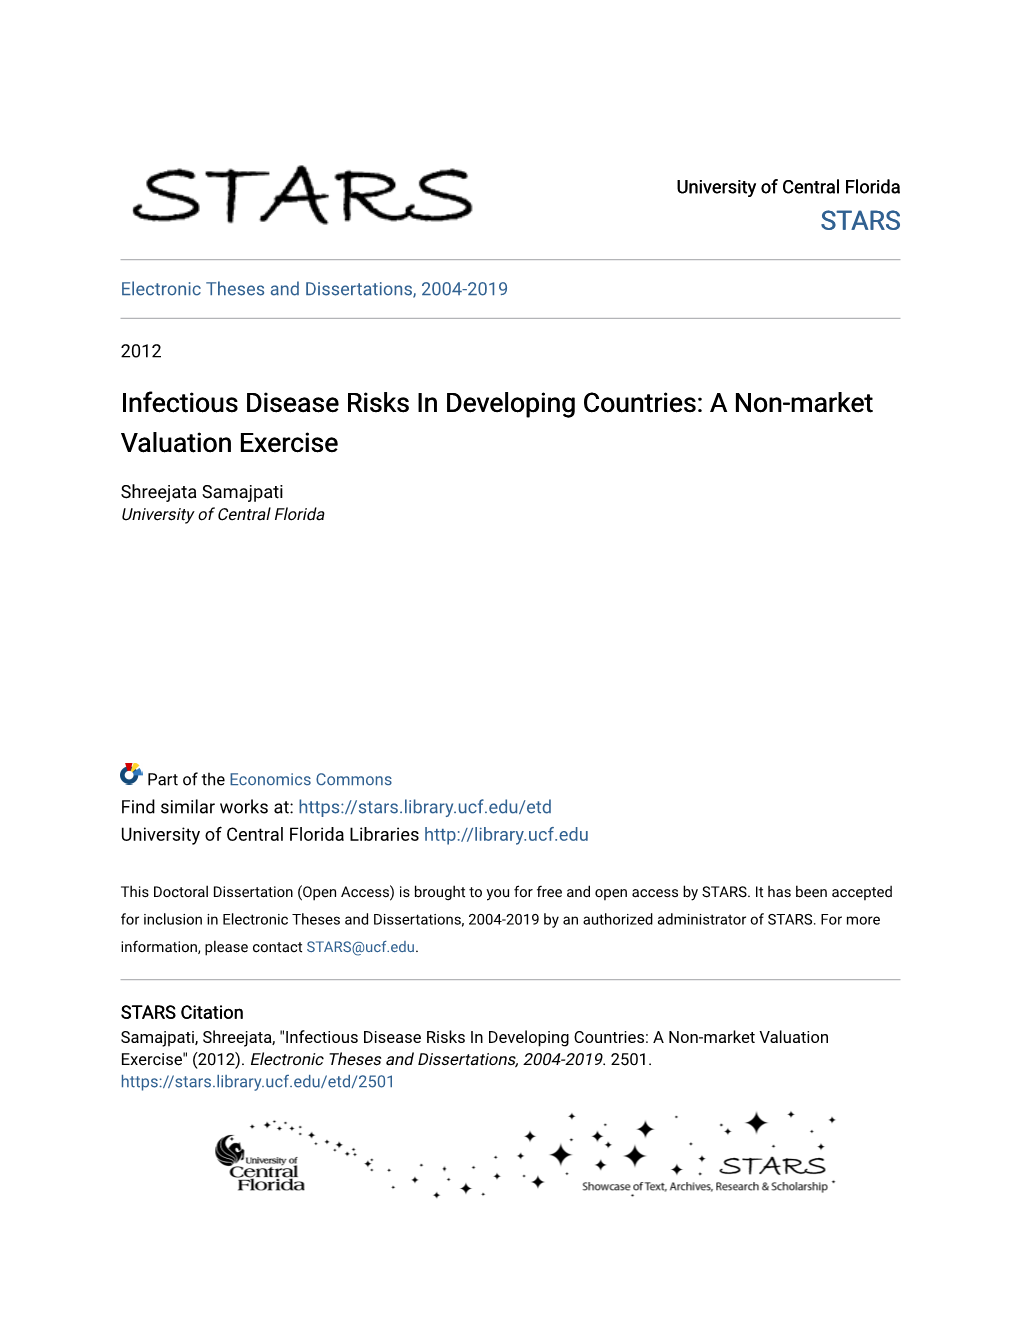 Infectious Disease Risks in Developing Countries: a Non-Market Valuation Exercise